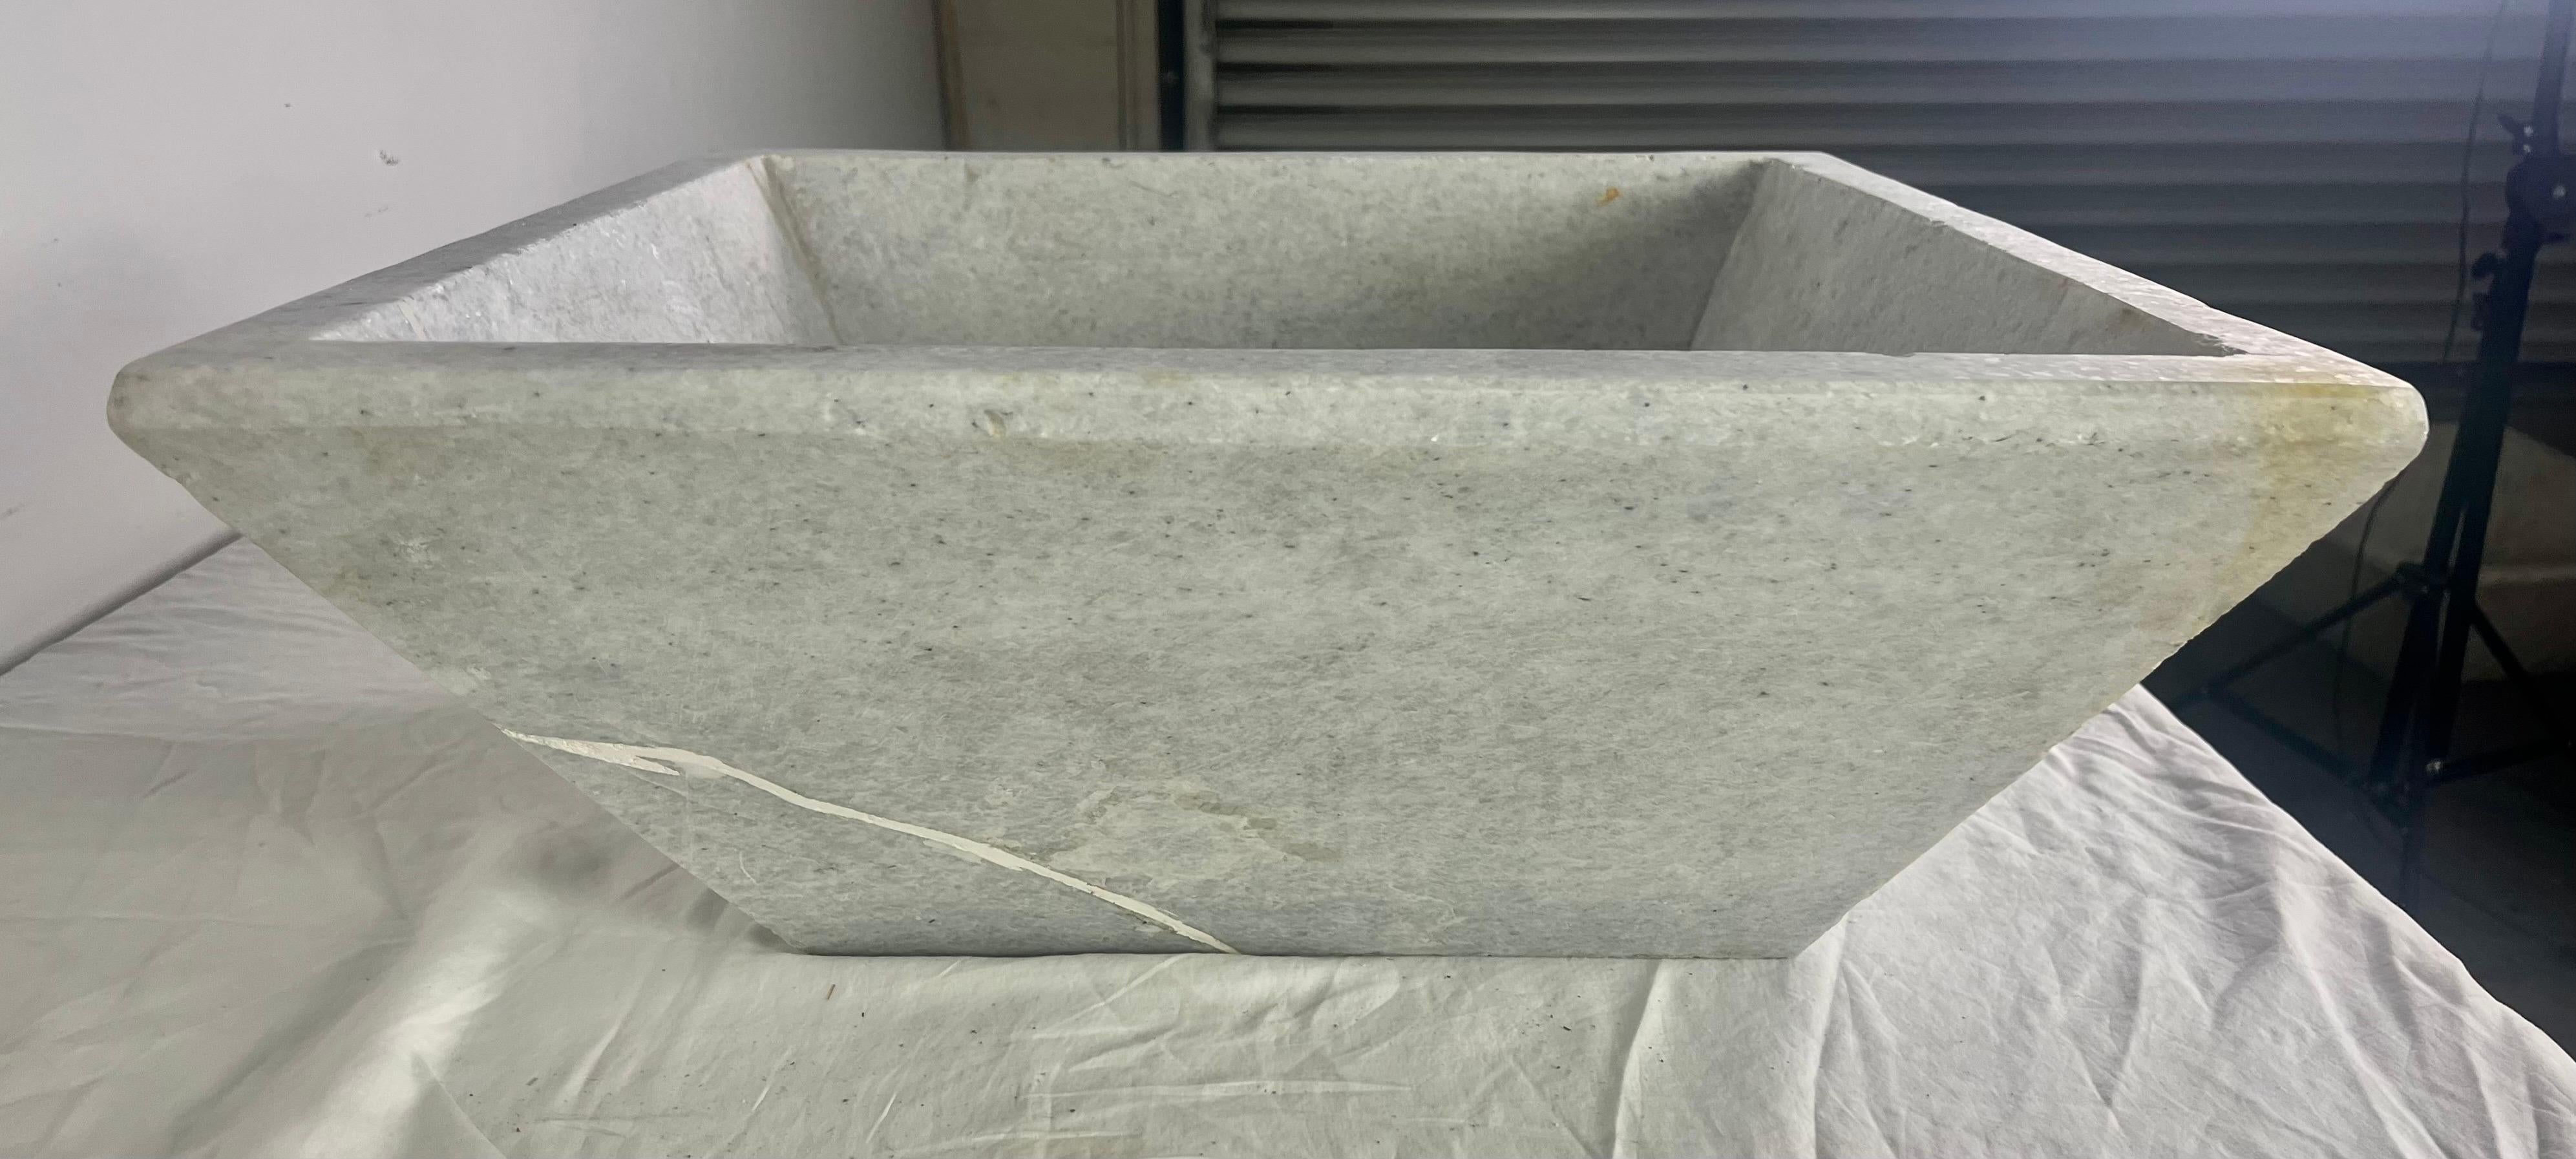 MId 20th C. Italian Stone Sink  For Sale 1